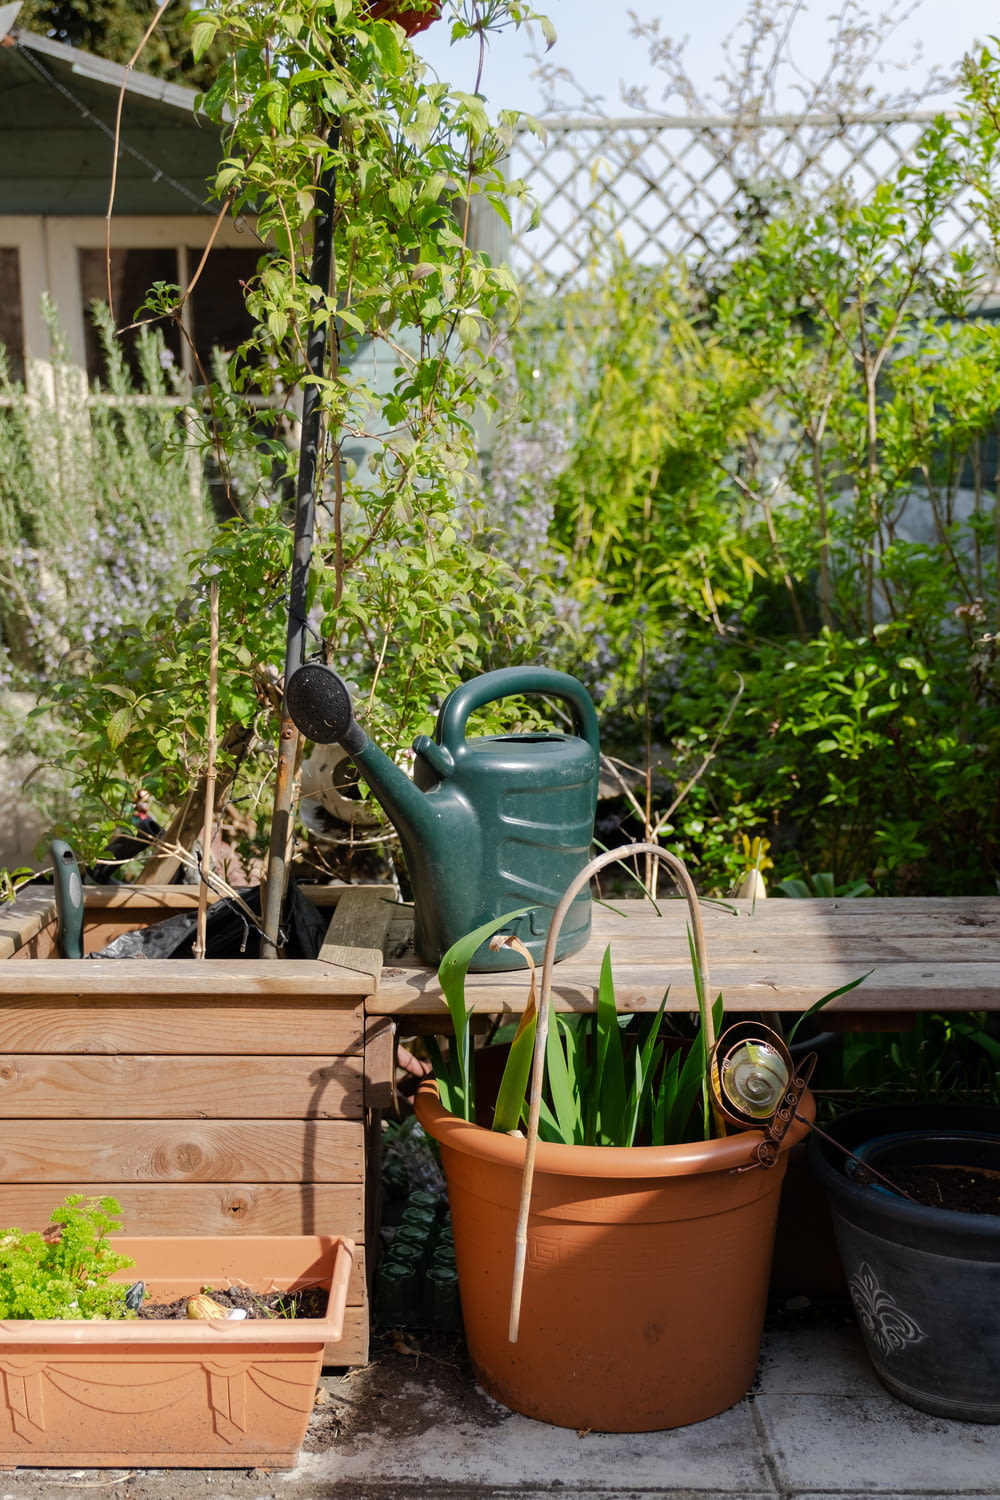 a garden area with potted plants and a watering can